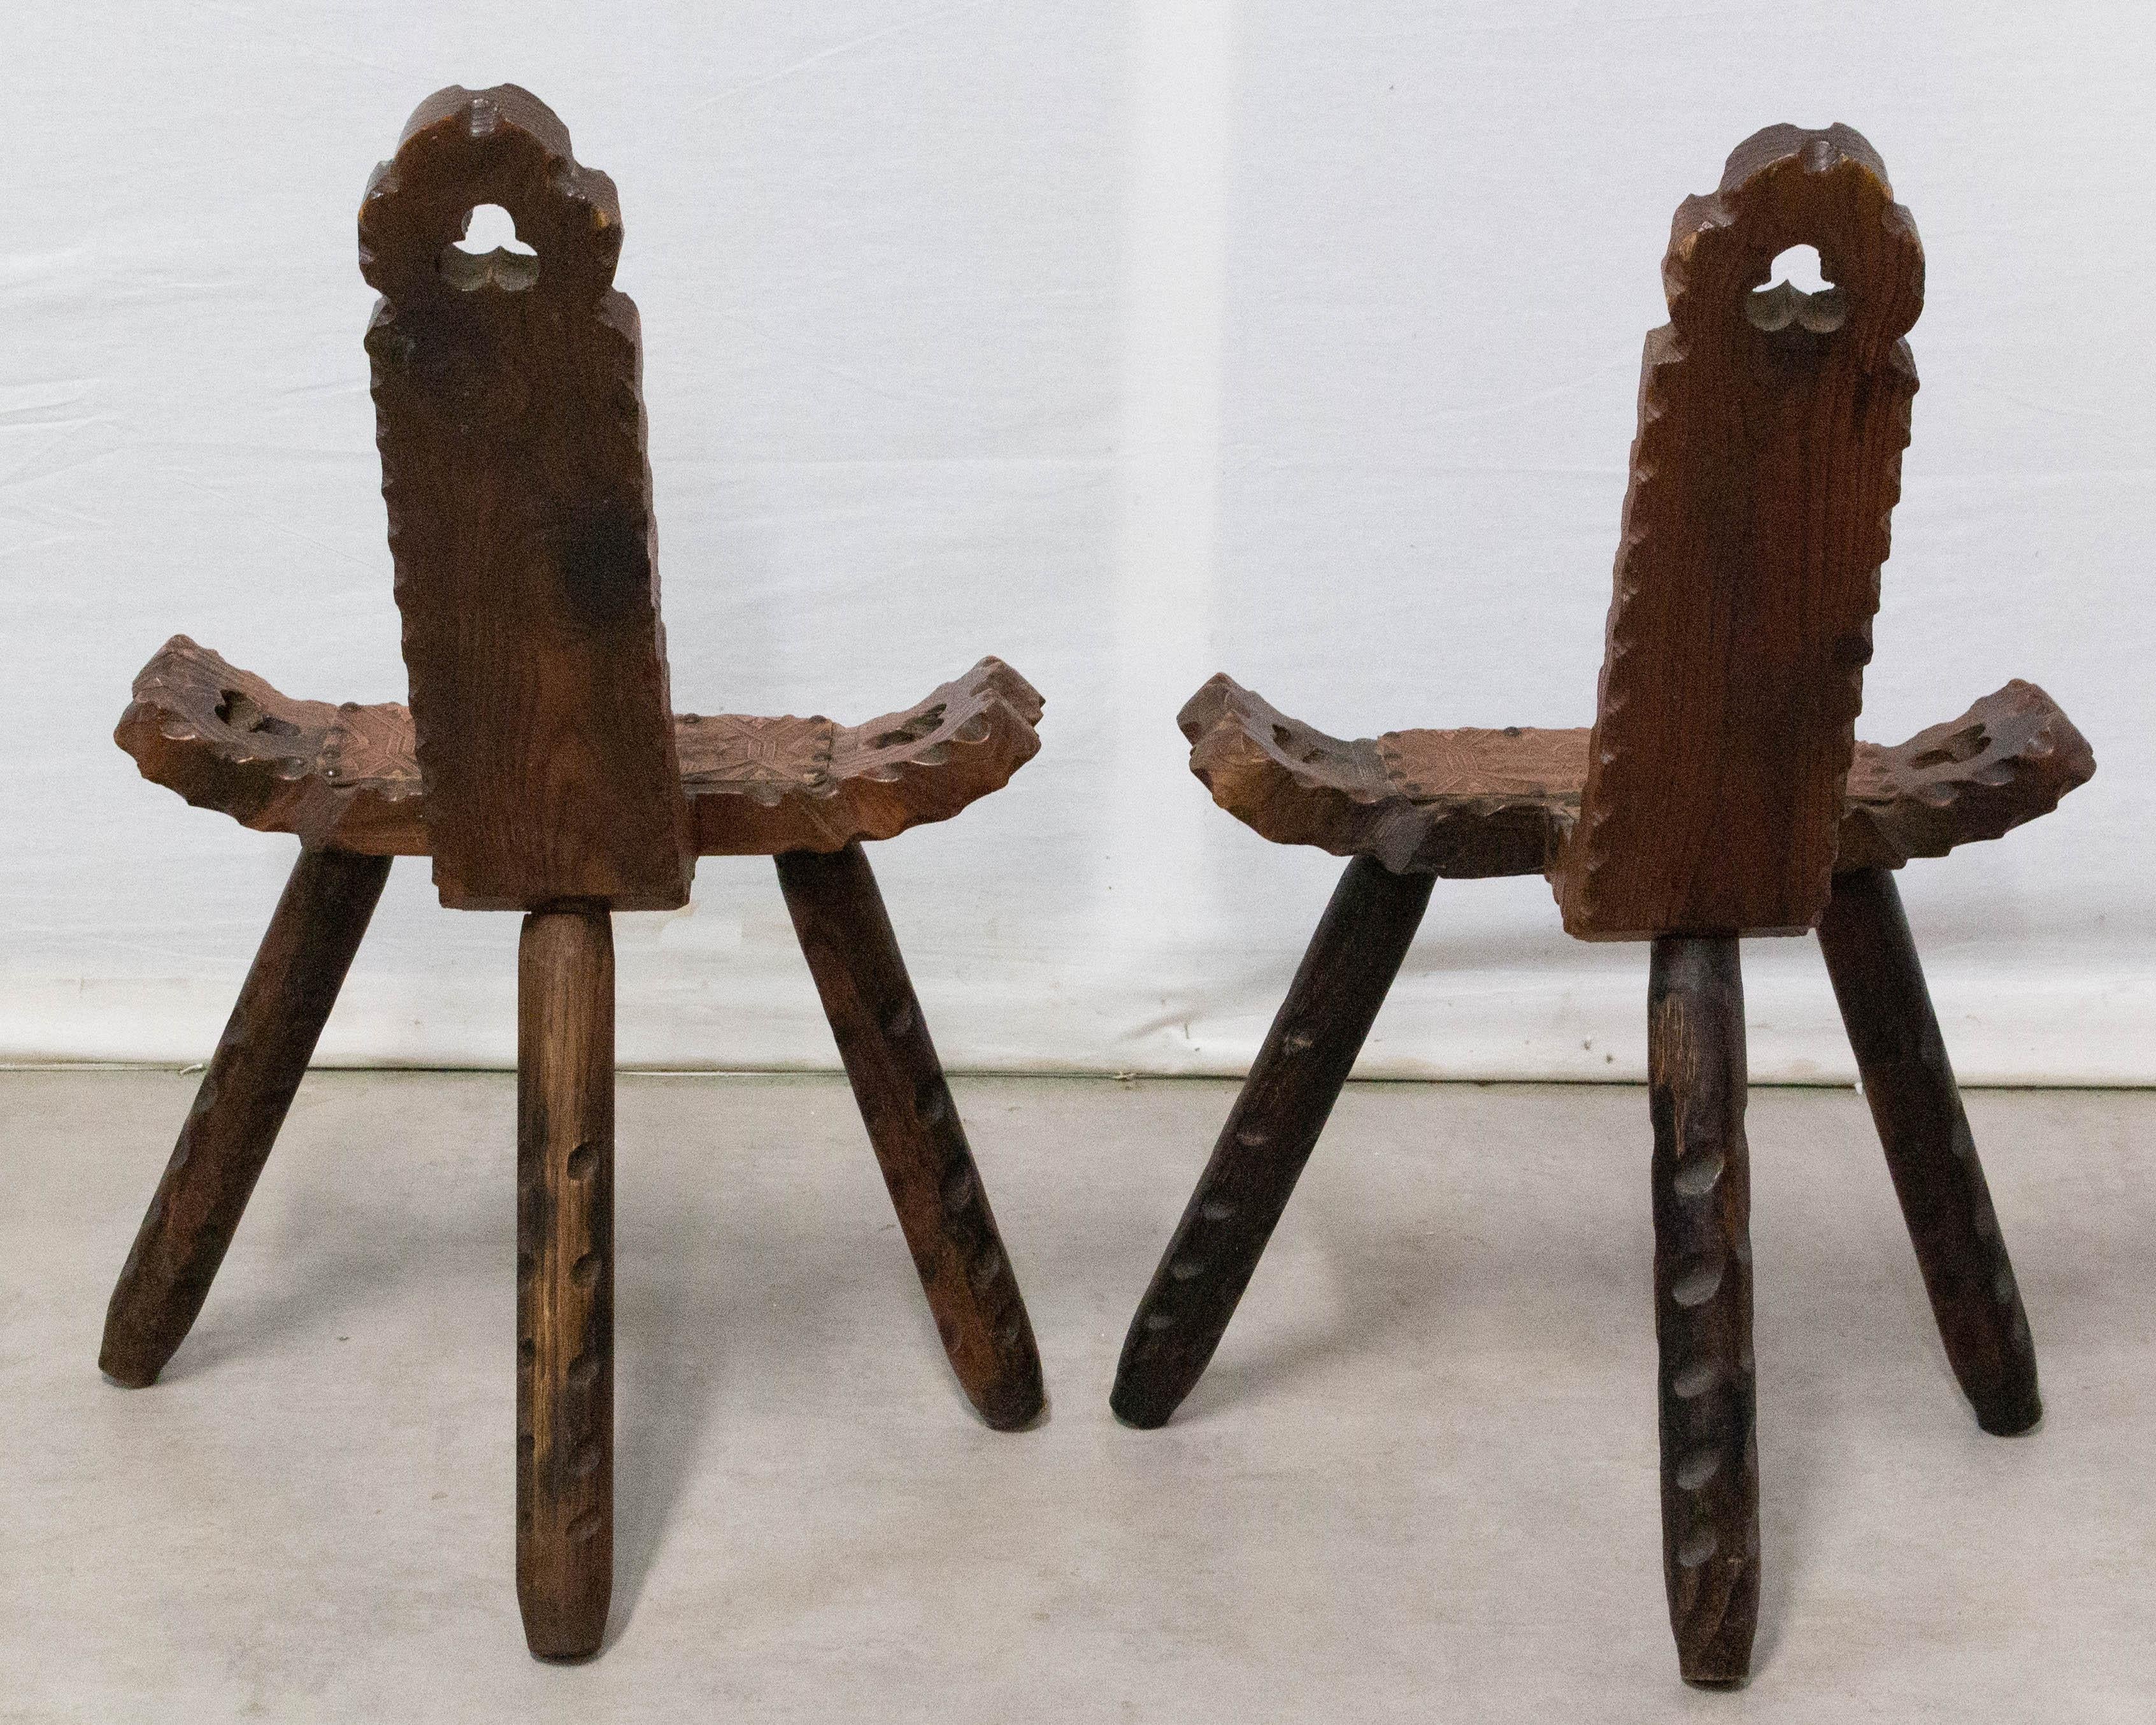 Pair of three legs wood and leather chairs, Spain
Very good condition, sound and solid.

Shipping:
1 pack: 85/53/52 cm 8 kg.